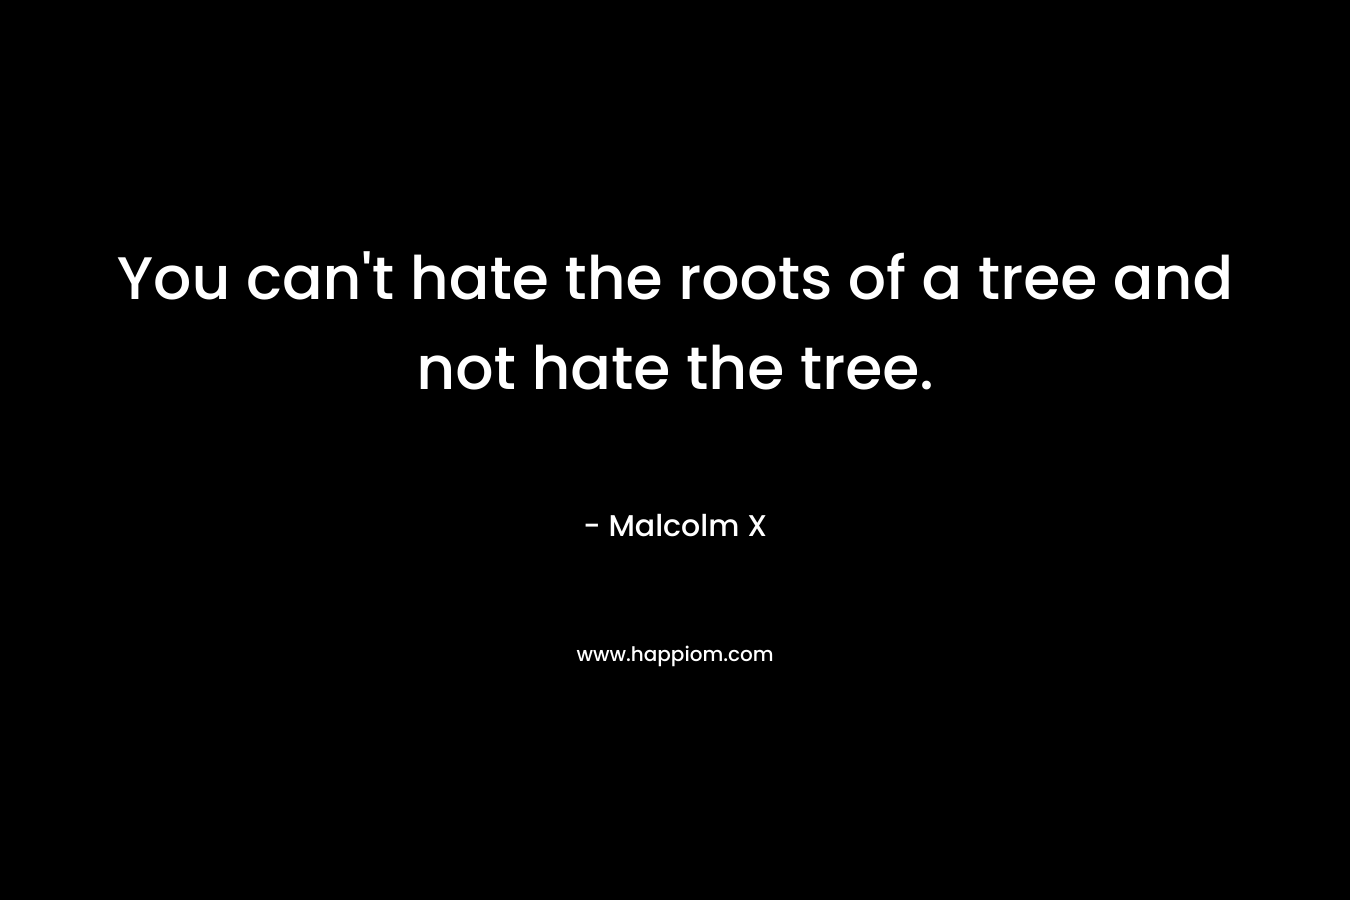 You can’t hate the roots of a tree and not hate the tree. – Malcolm X